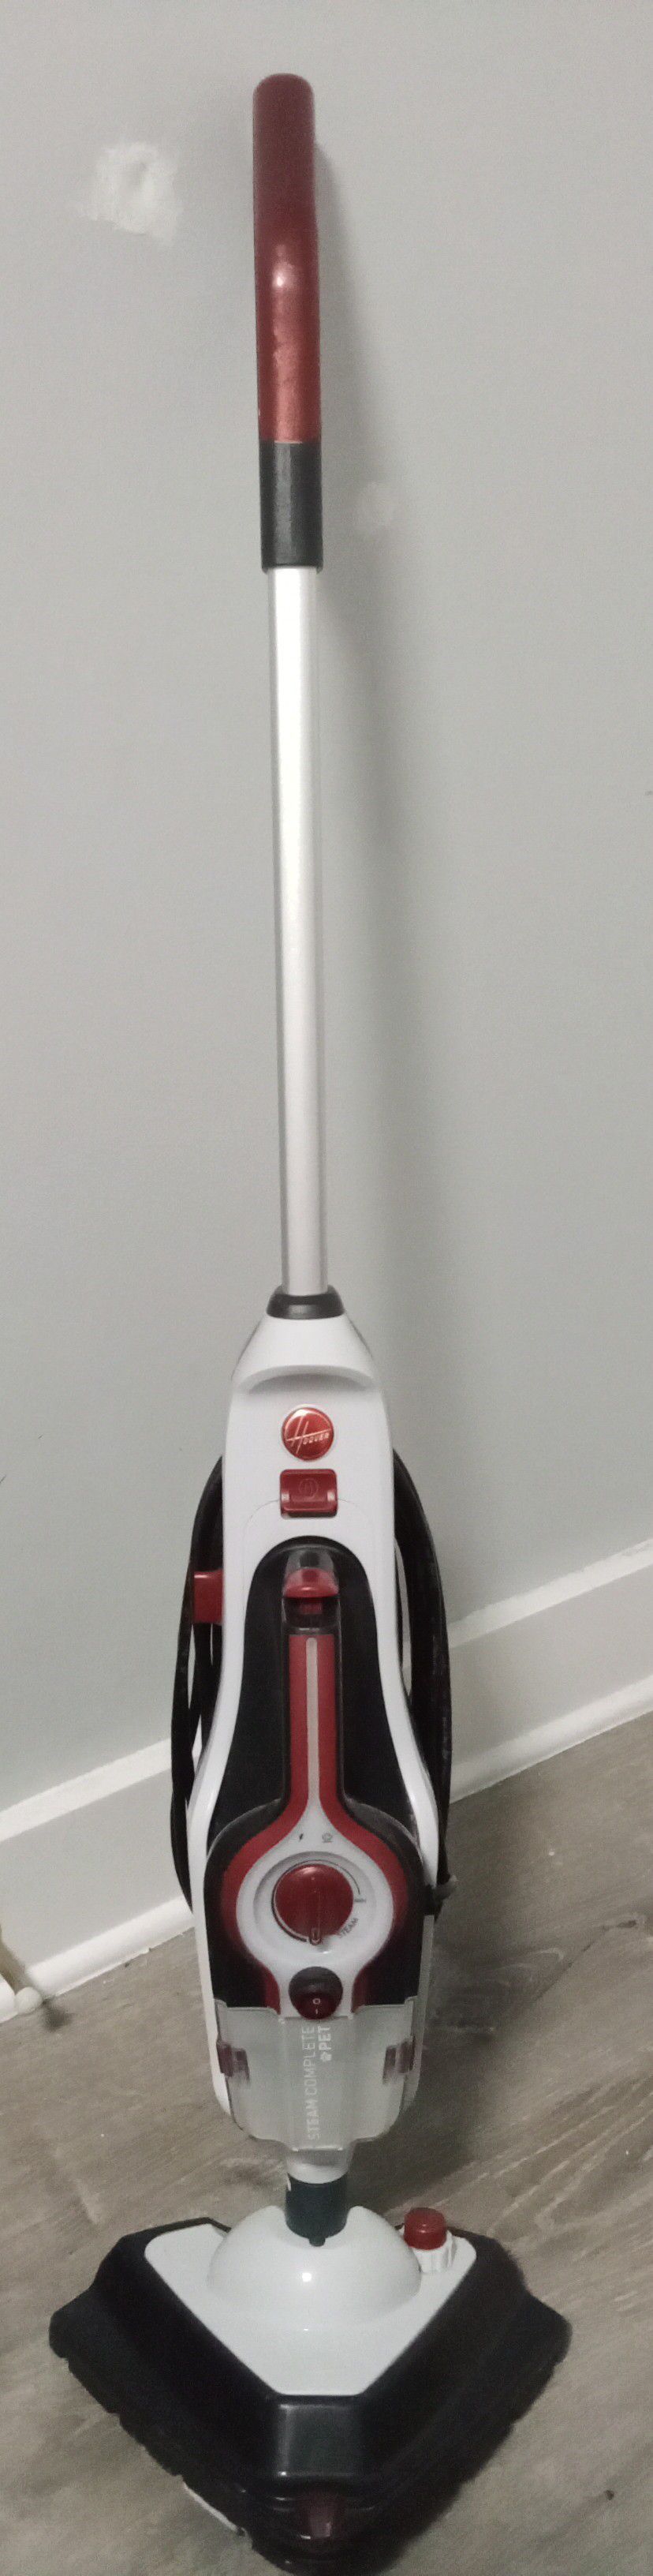 HOOVER COMPLETE PET STEAM CLEANER